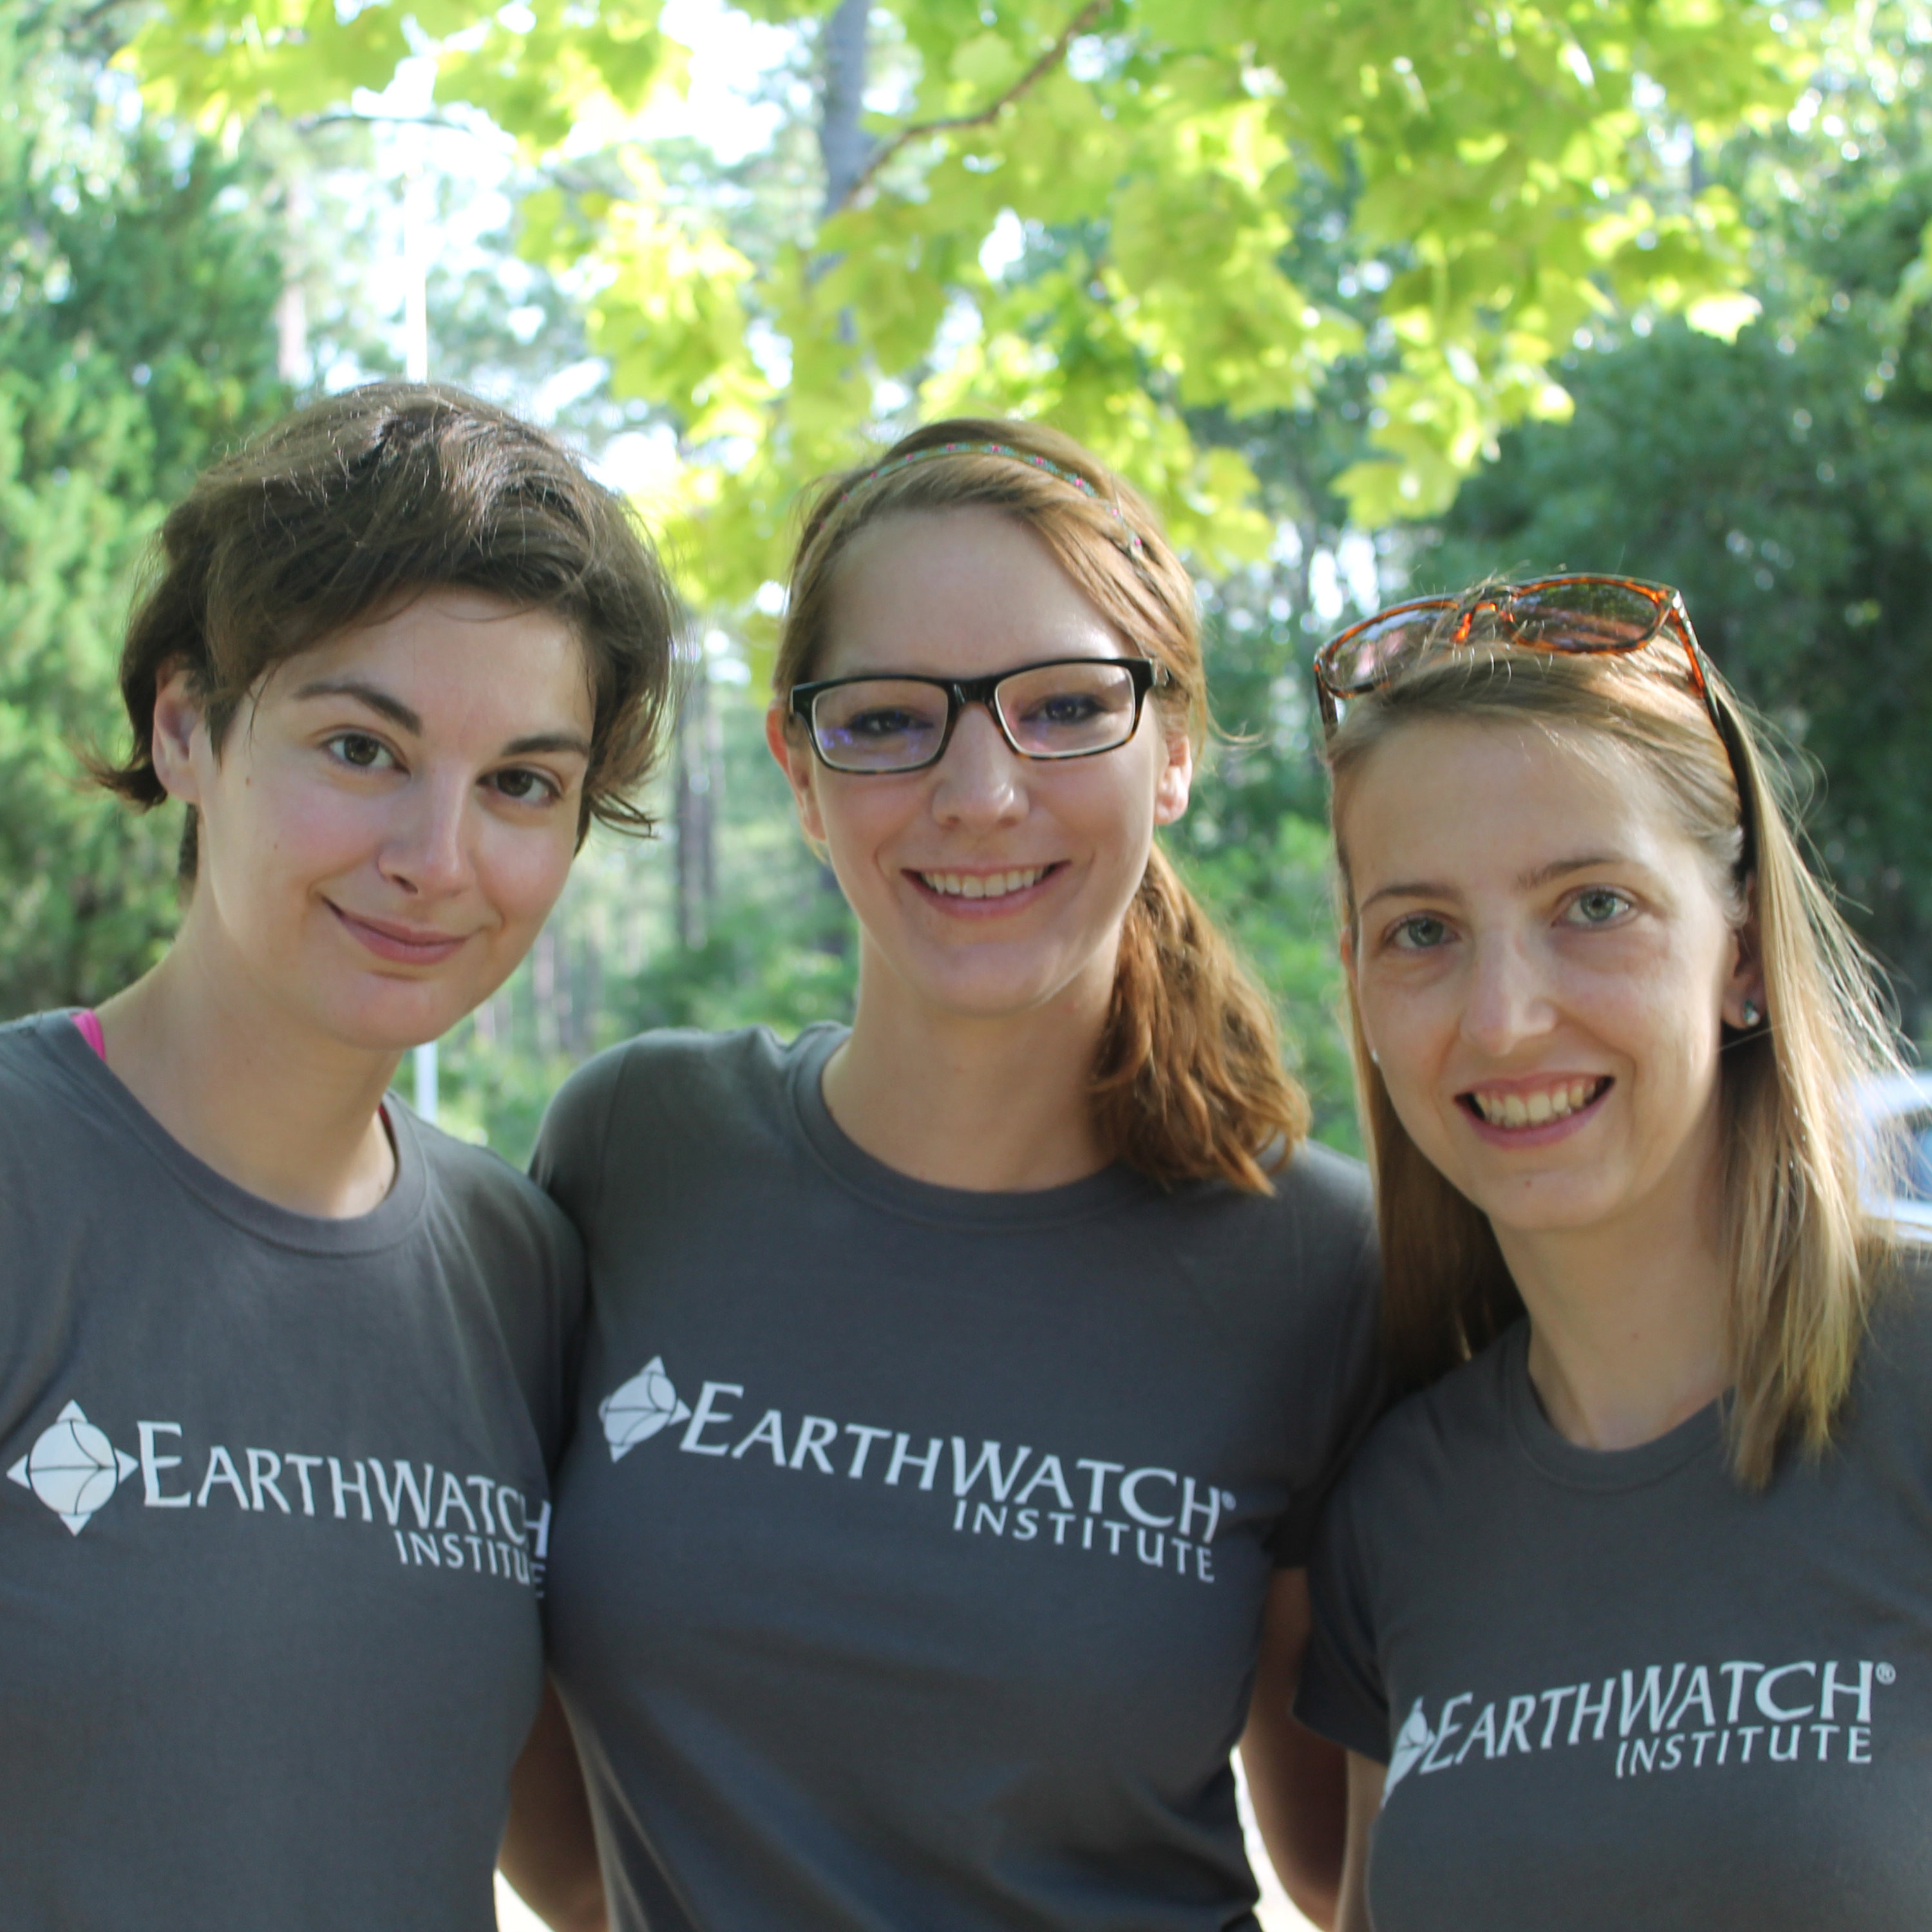 Become an Earthwatch Ambassador and help us spread the word to recruit future volunteers to assist our teams in the field!